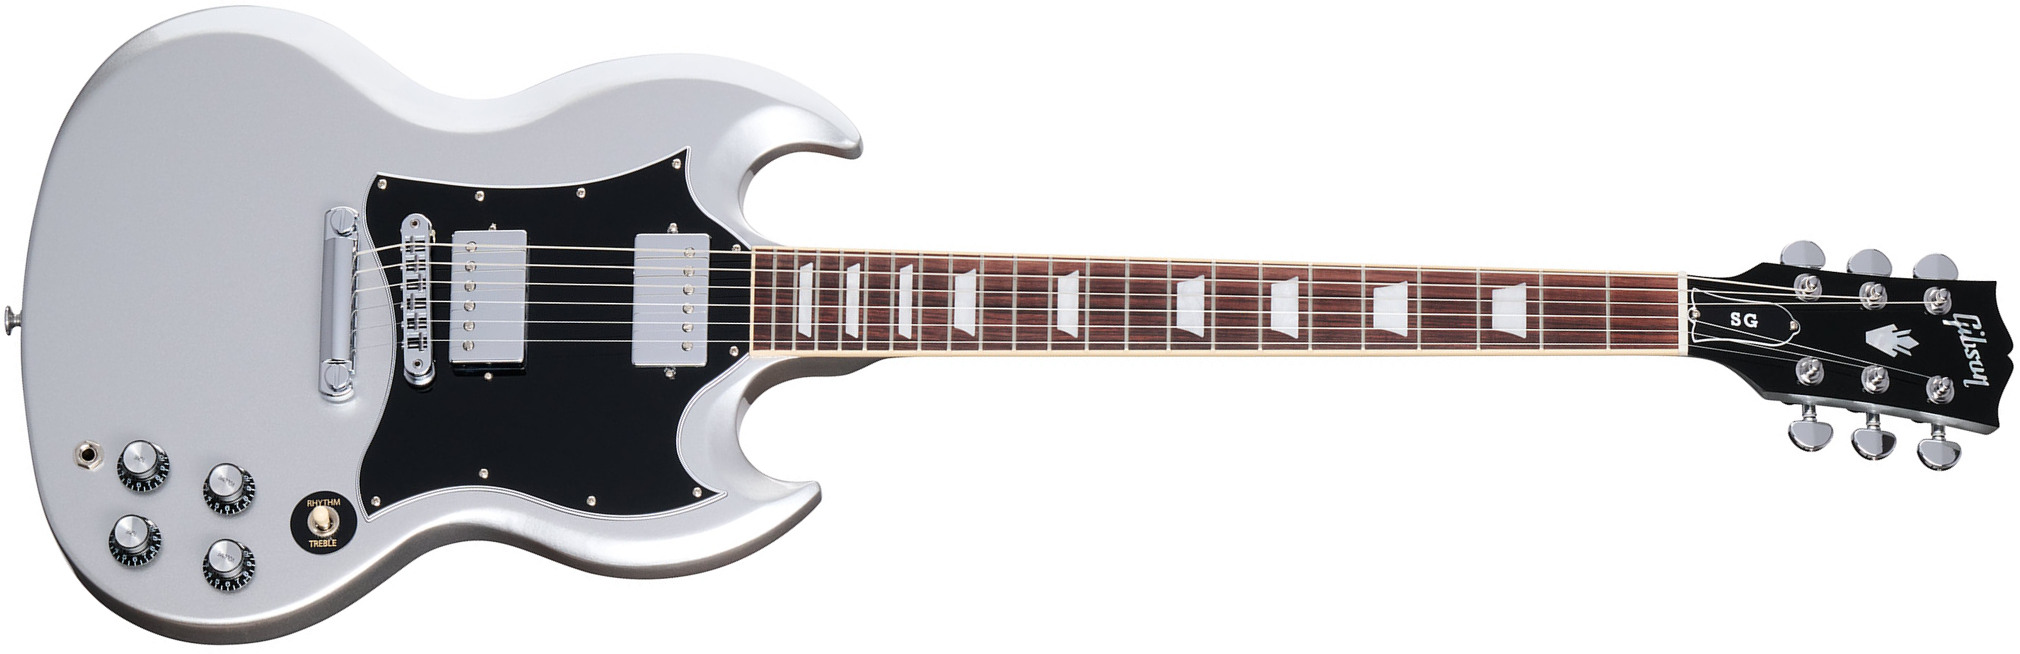 Gibson Sg Standard Custom Color 2h Ht Rw - Silver Mist - Double cut electric guitar - Main picture